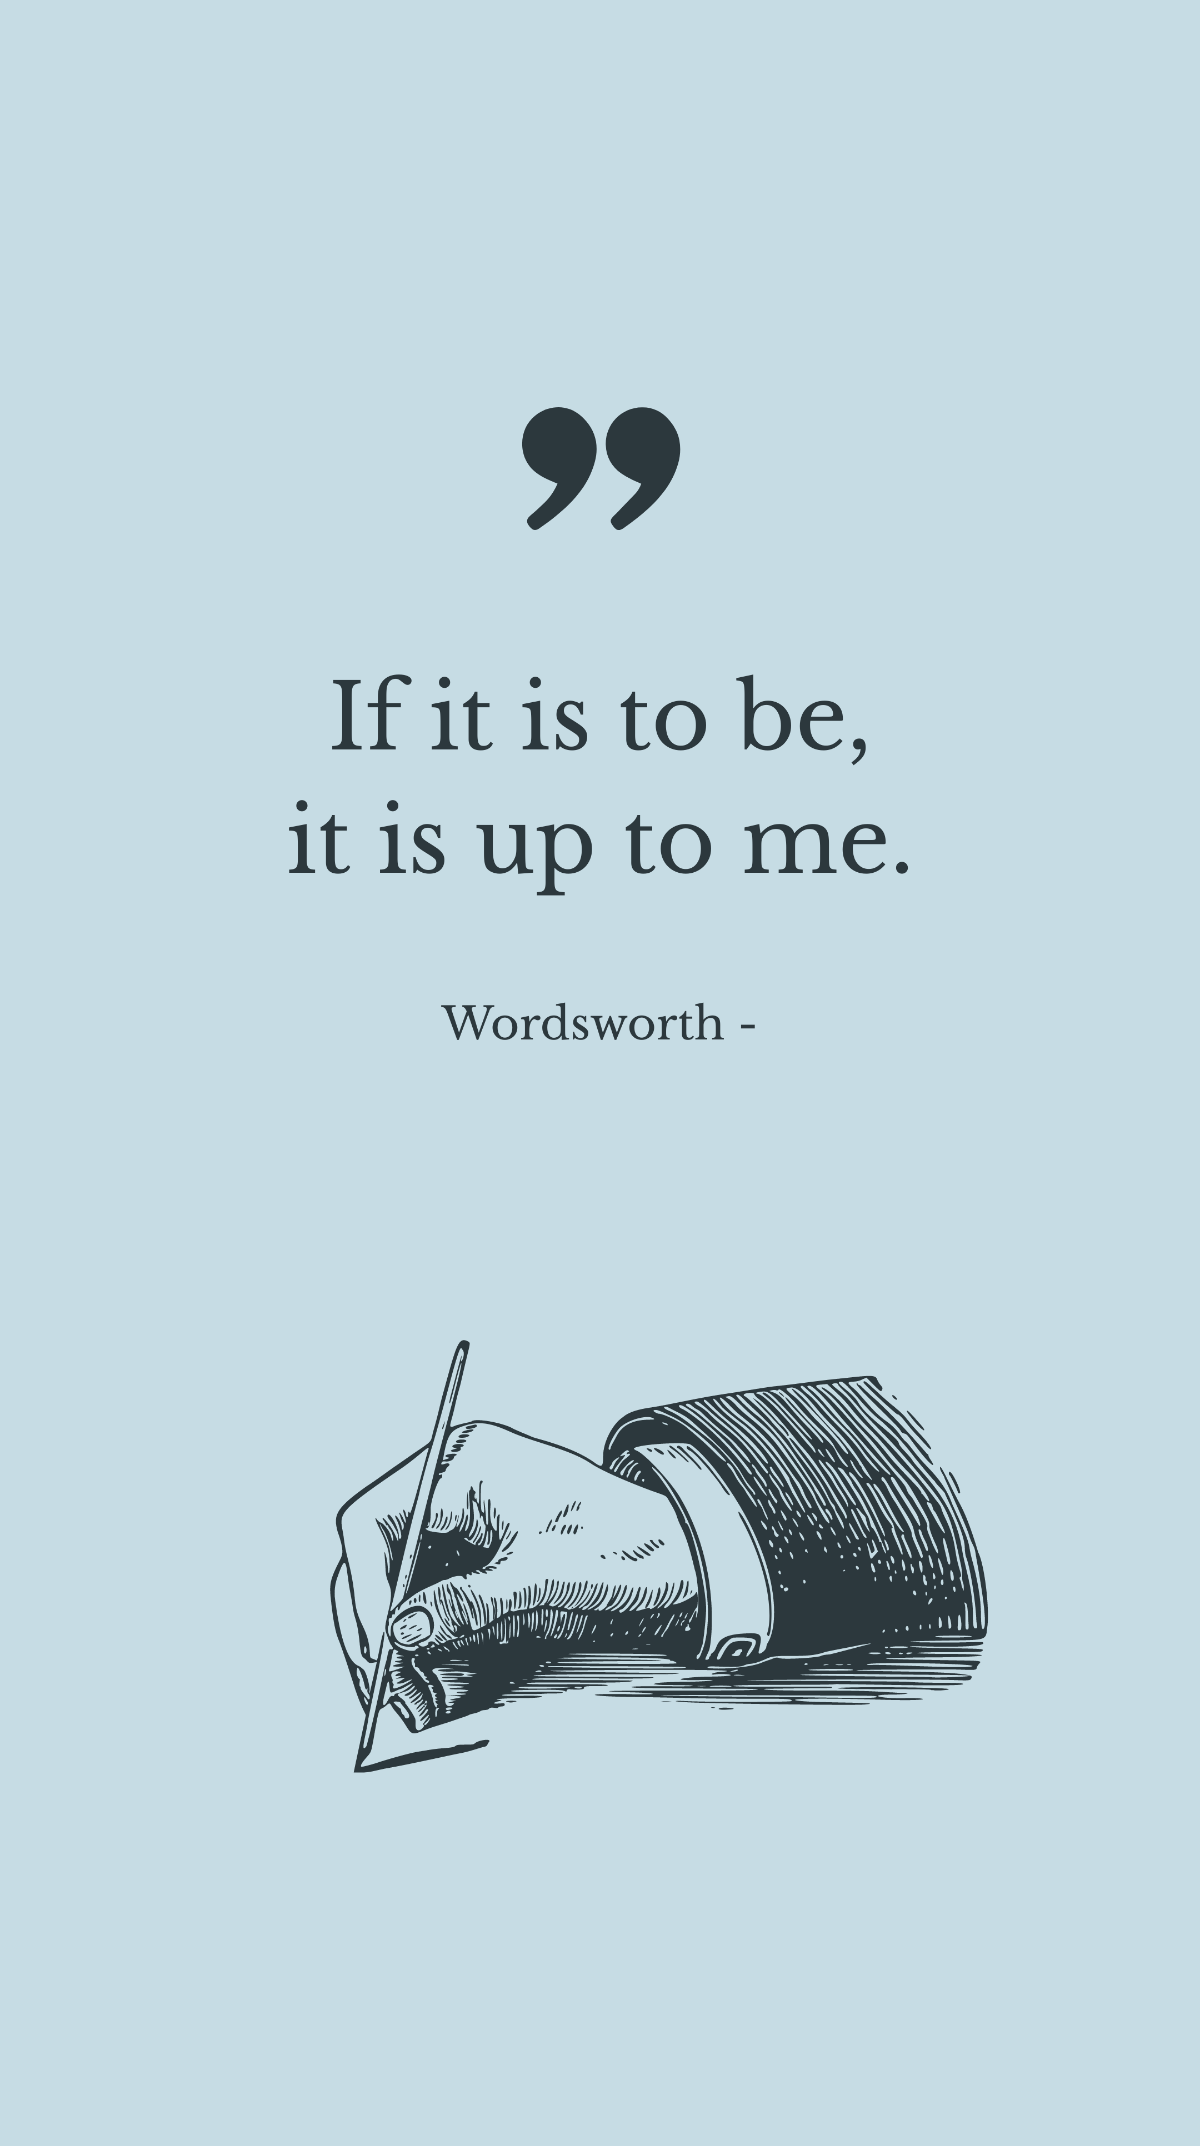 Wordsworth - If it is to be, it is up to me. Template